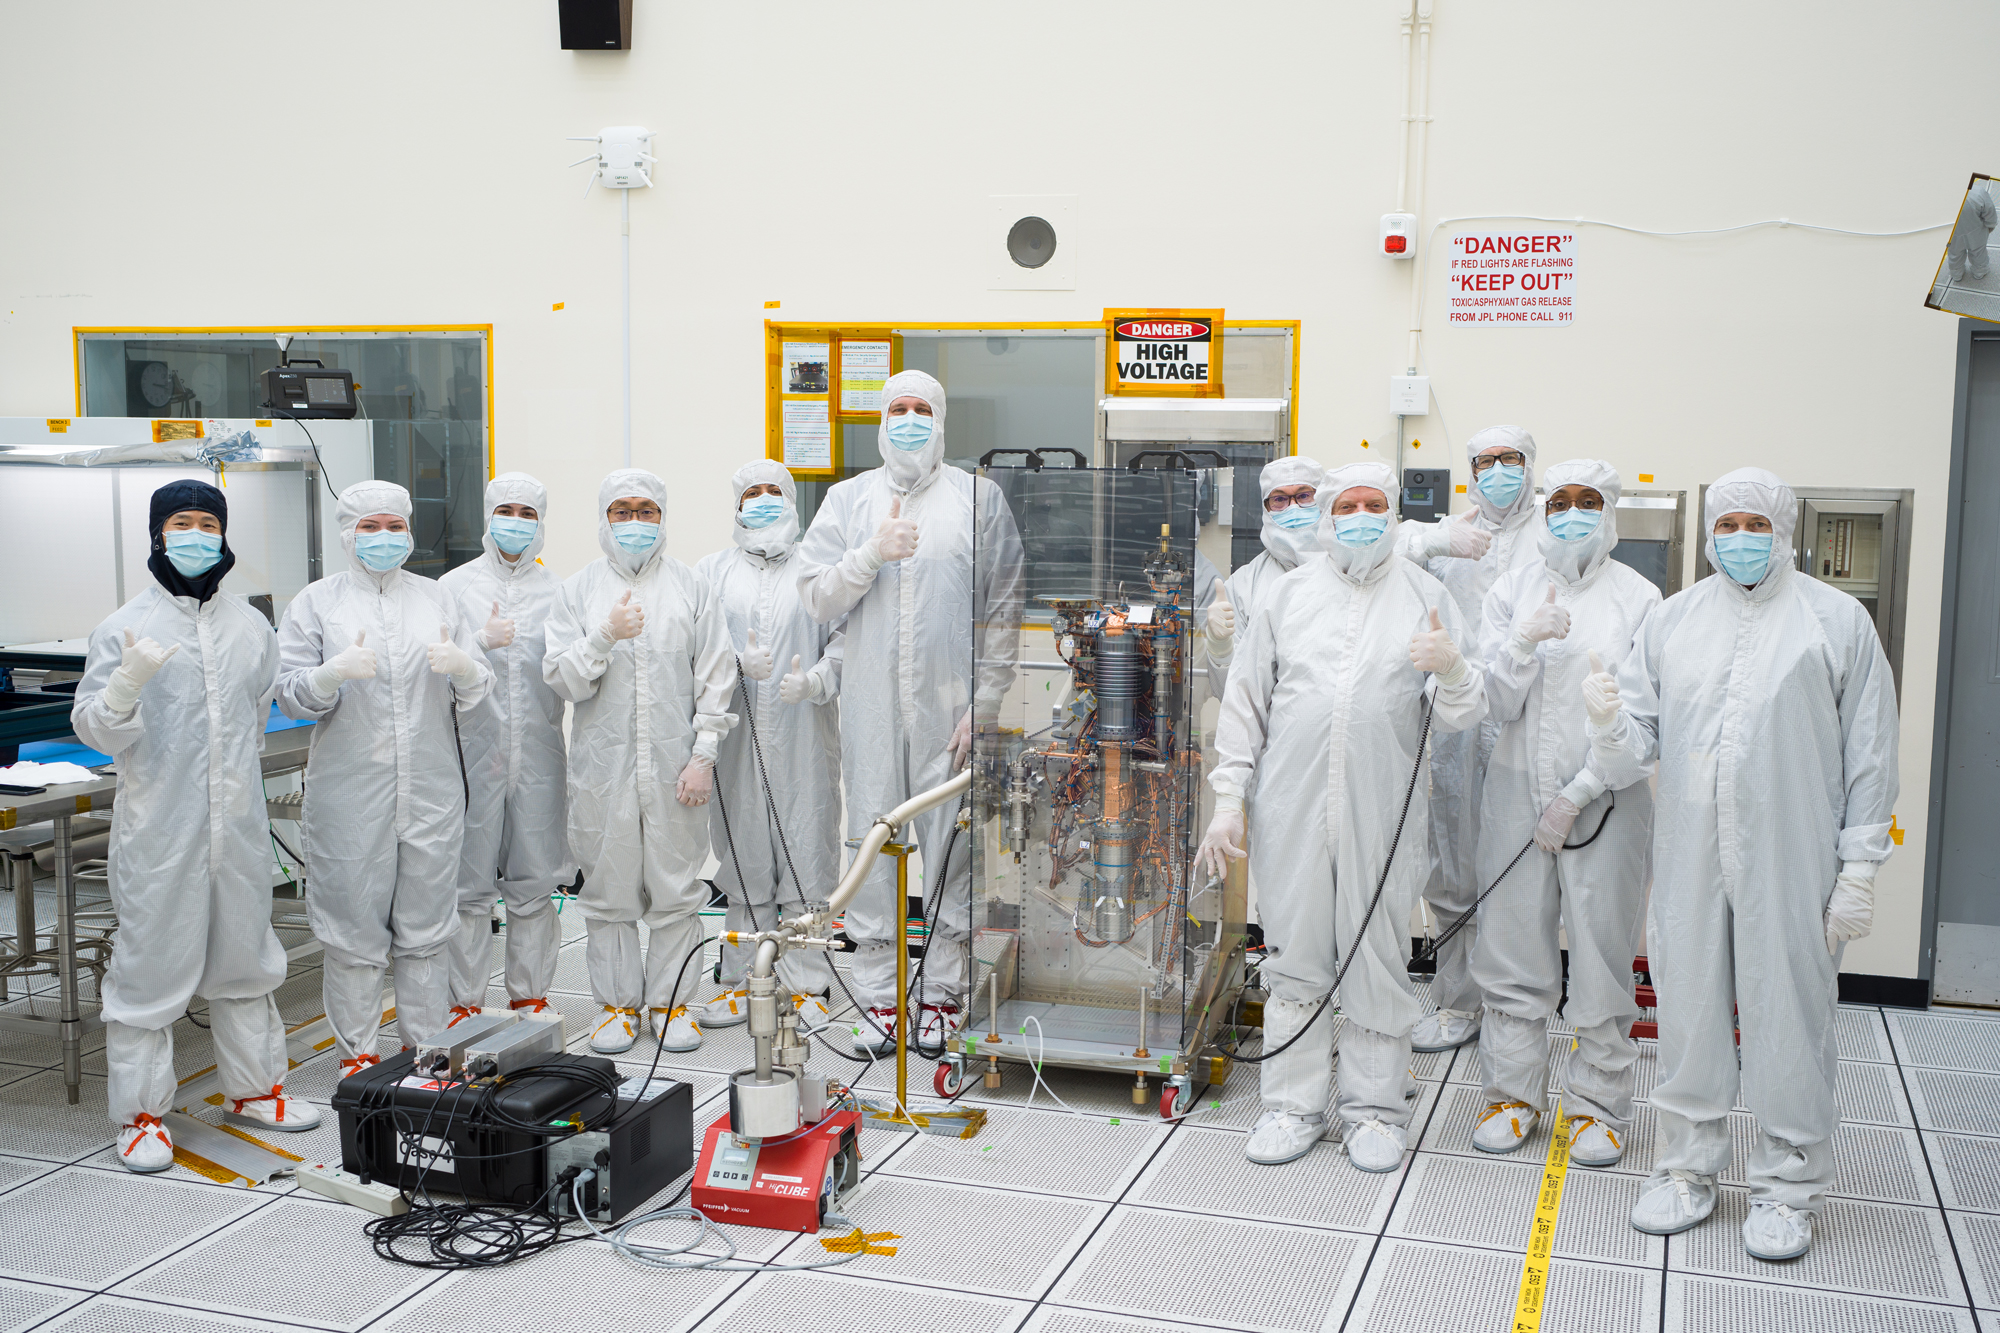 A group of eleven engineers wearing full-body white protective clothing stand facing the camera in a cleanroom. All of the engineers are giving a thumbs up hand expression. In the middle of the group of engineers is a large transparent box, approximately five feet tall, two feet wide, and two feet deep. Inside the transparent box is the mass spectrometer. Europa Clipper’s mass spectrometer takes up the middle of this image. The instrument consists of a long cylinder, several feet tall and a couple of inches in diameter. It takes the shape of an automobile spark plug, with a series of ridges visible at the top. Copper plating and wires extend from the instrument in multiple areas. The instrument is installed on a supportive structure.